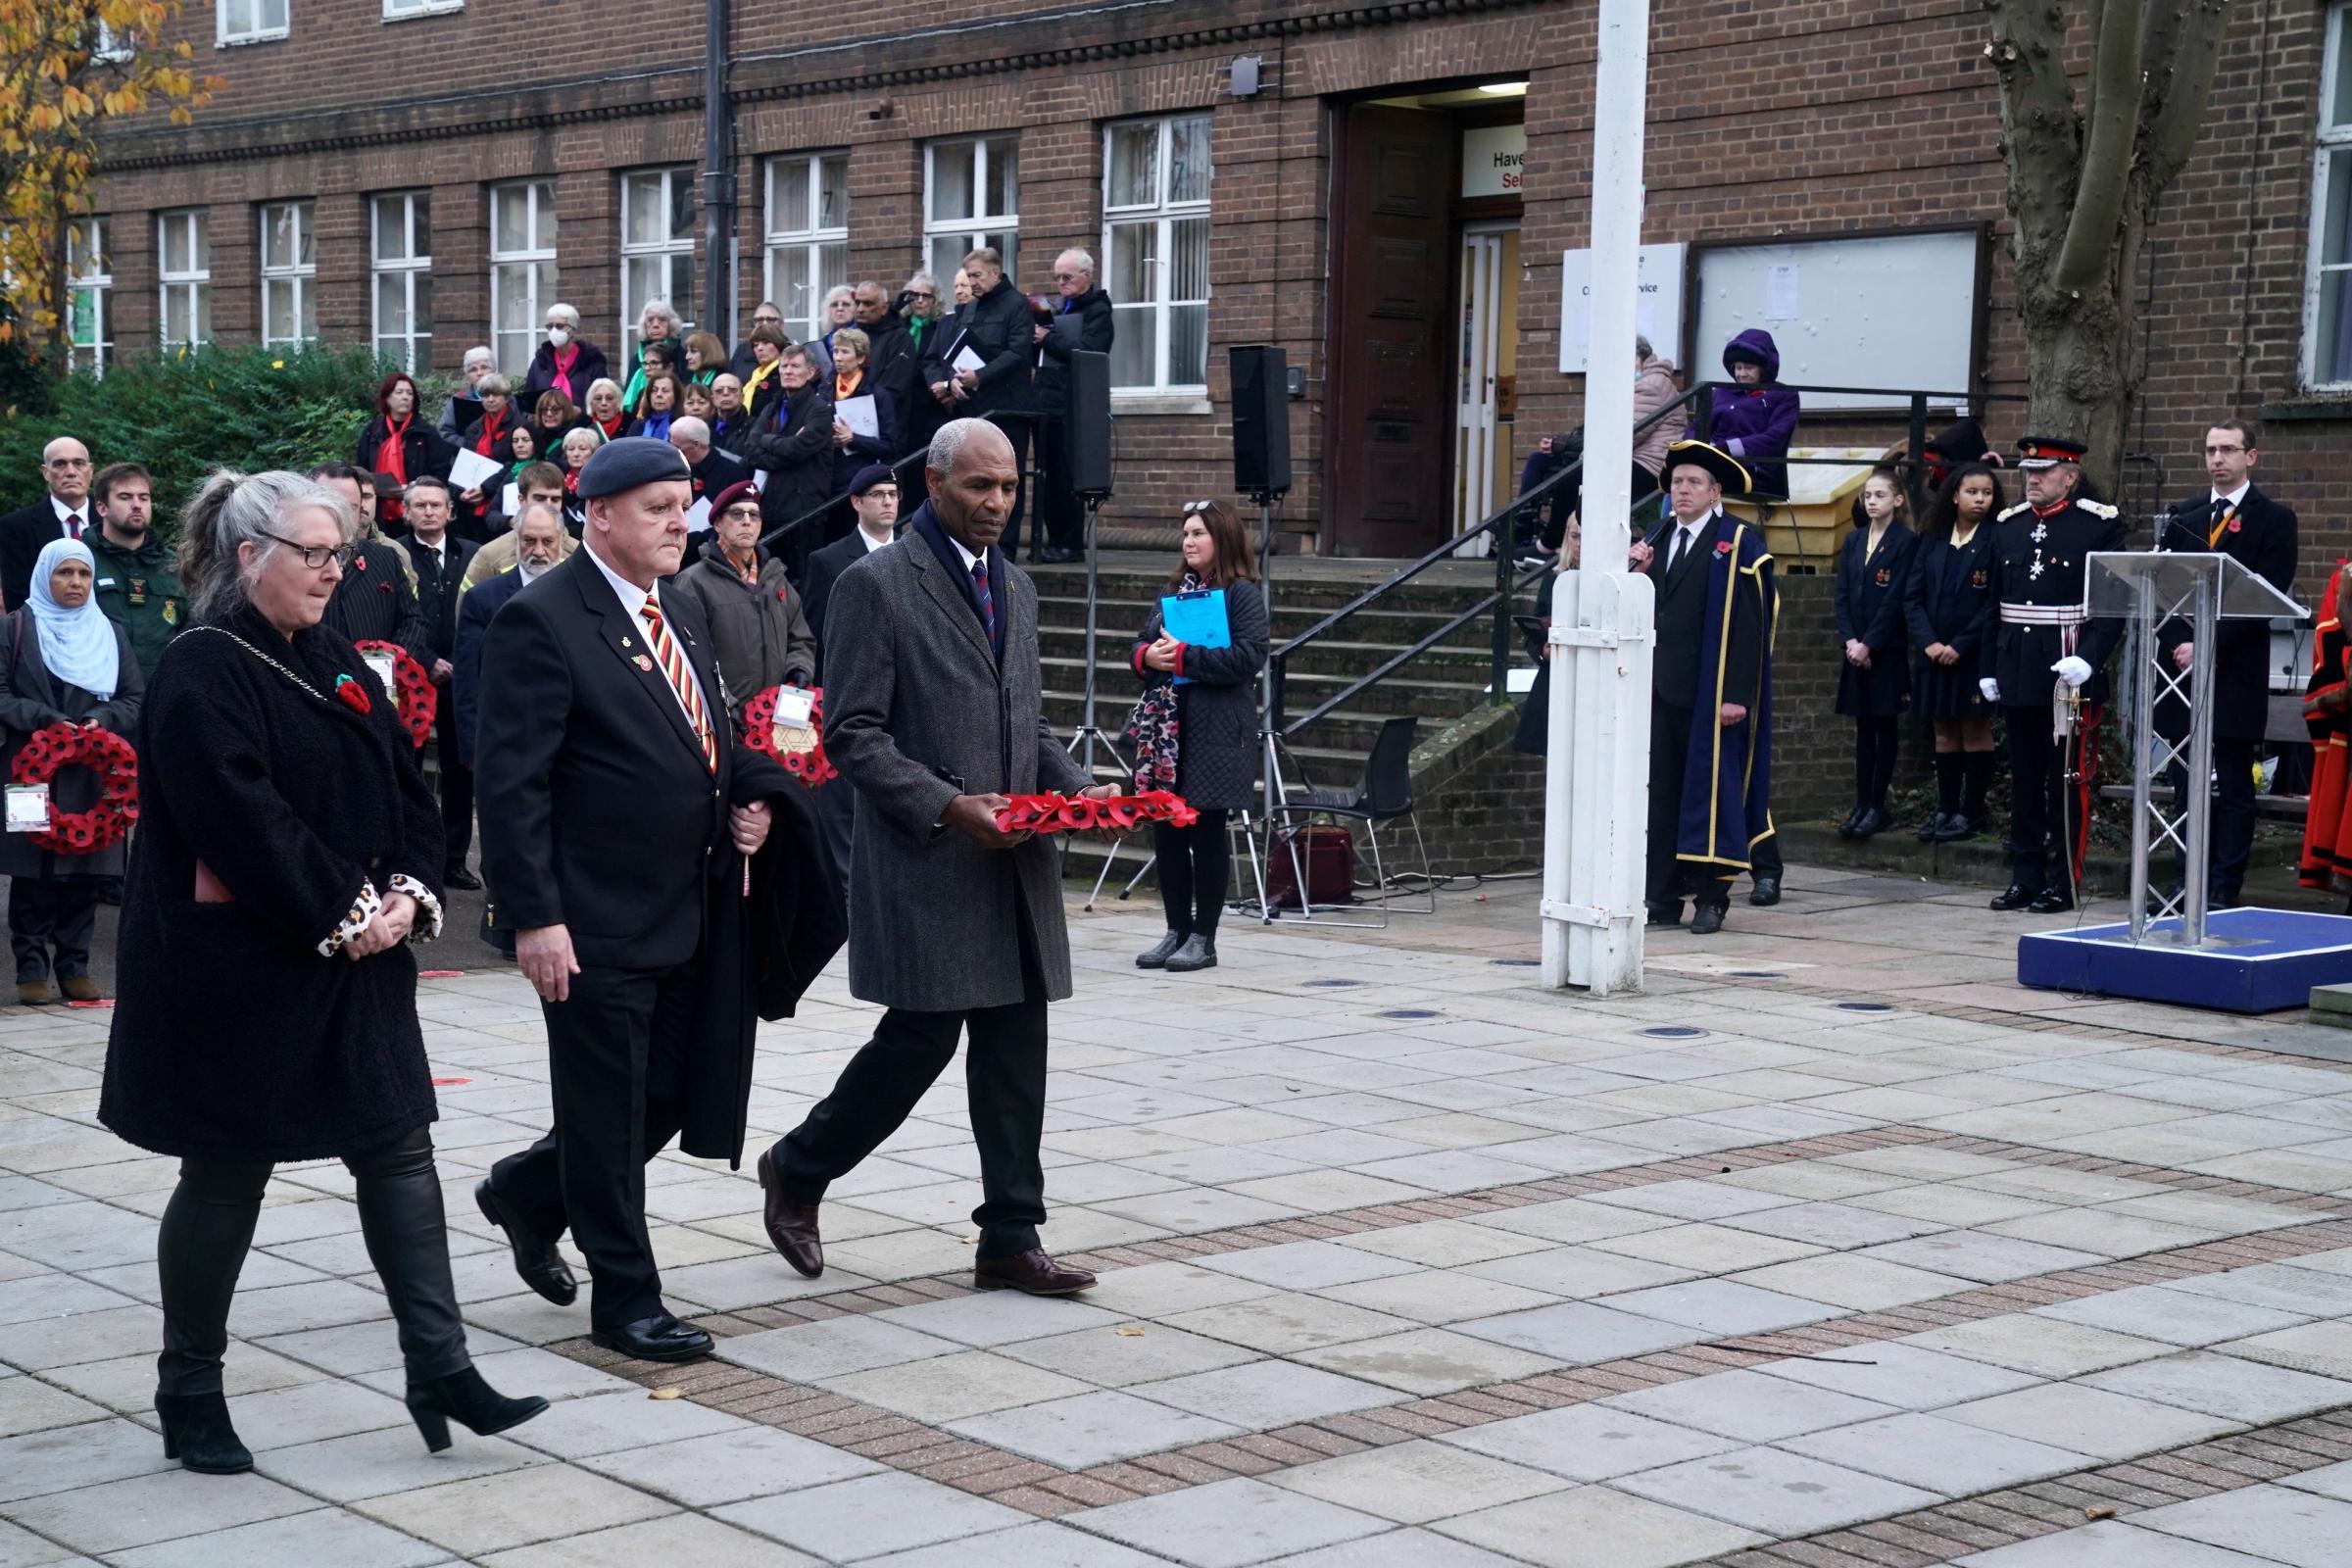 Watford legend Luther Blissett laid a wreath at the service (Photo: Simon Jacobs)